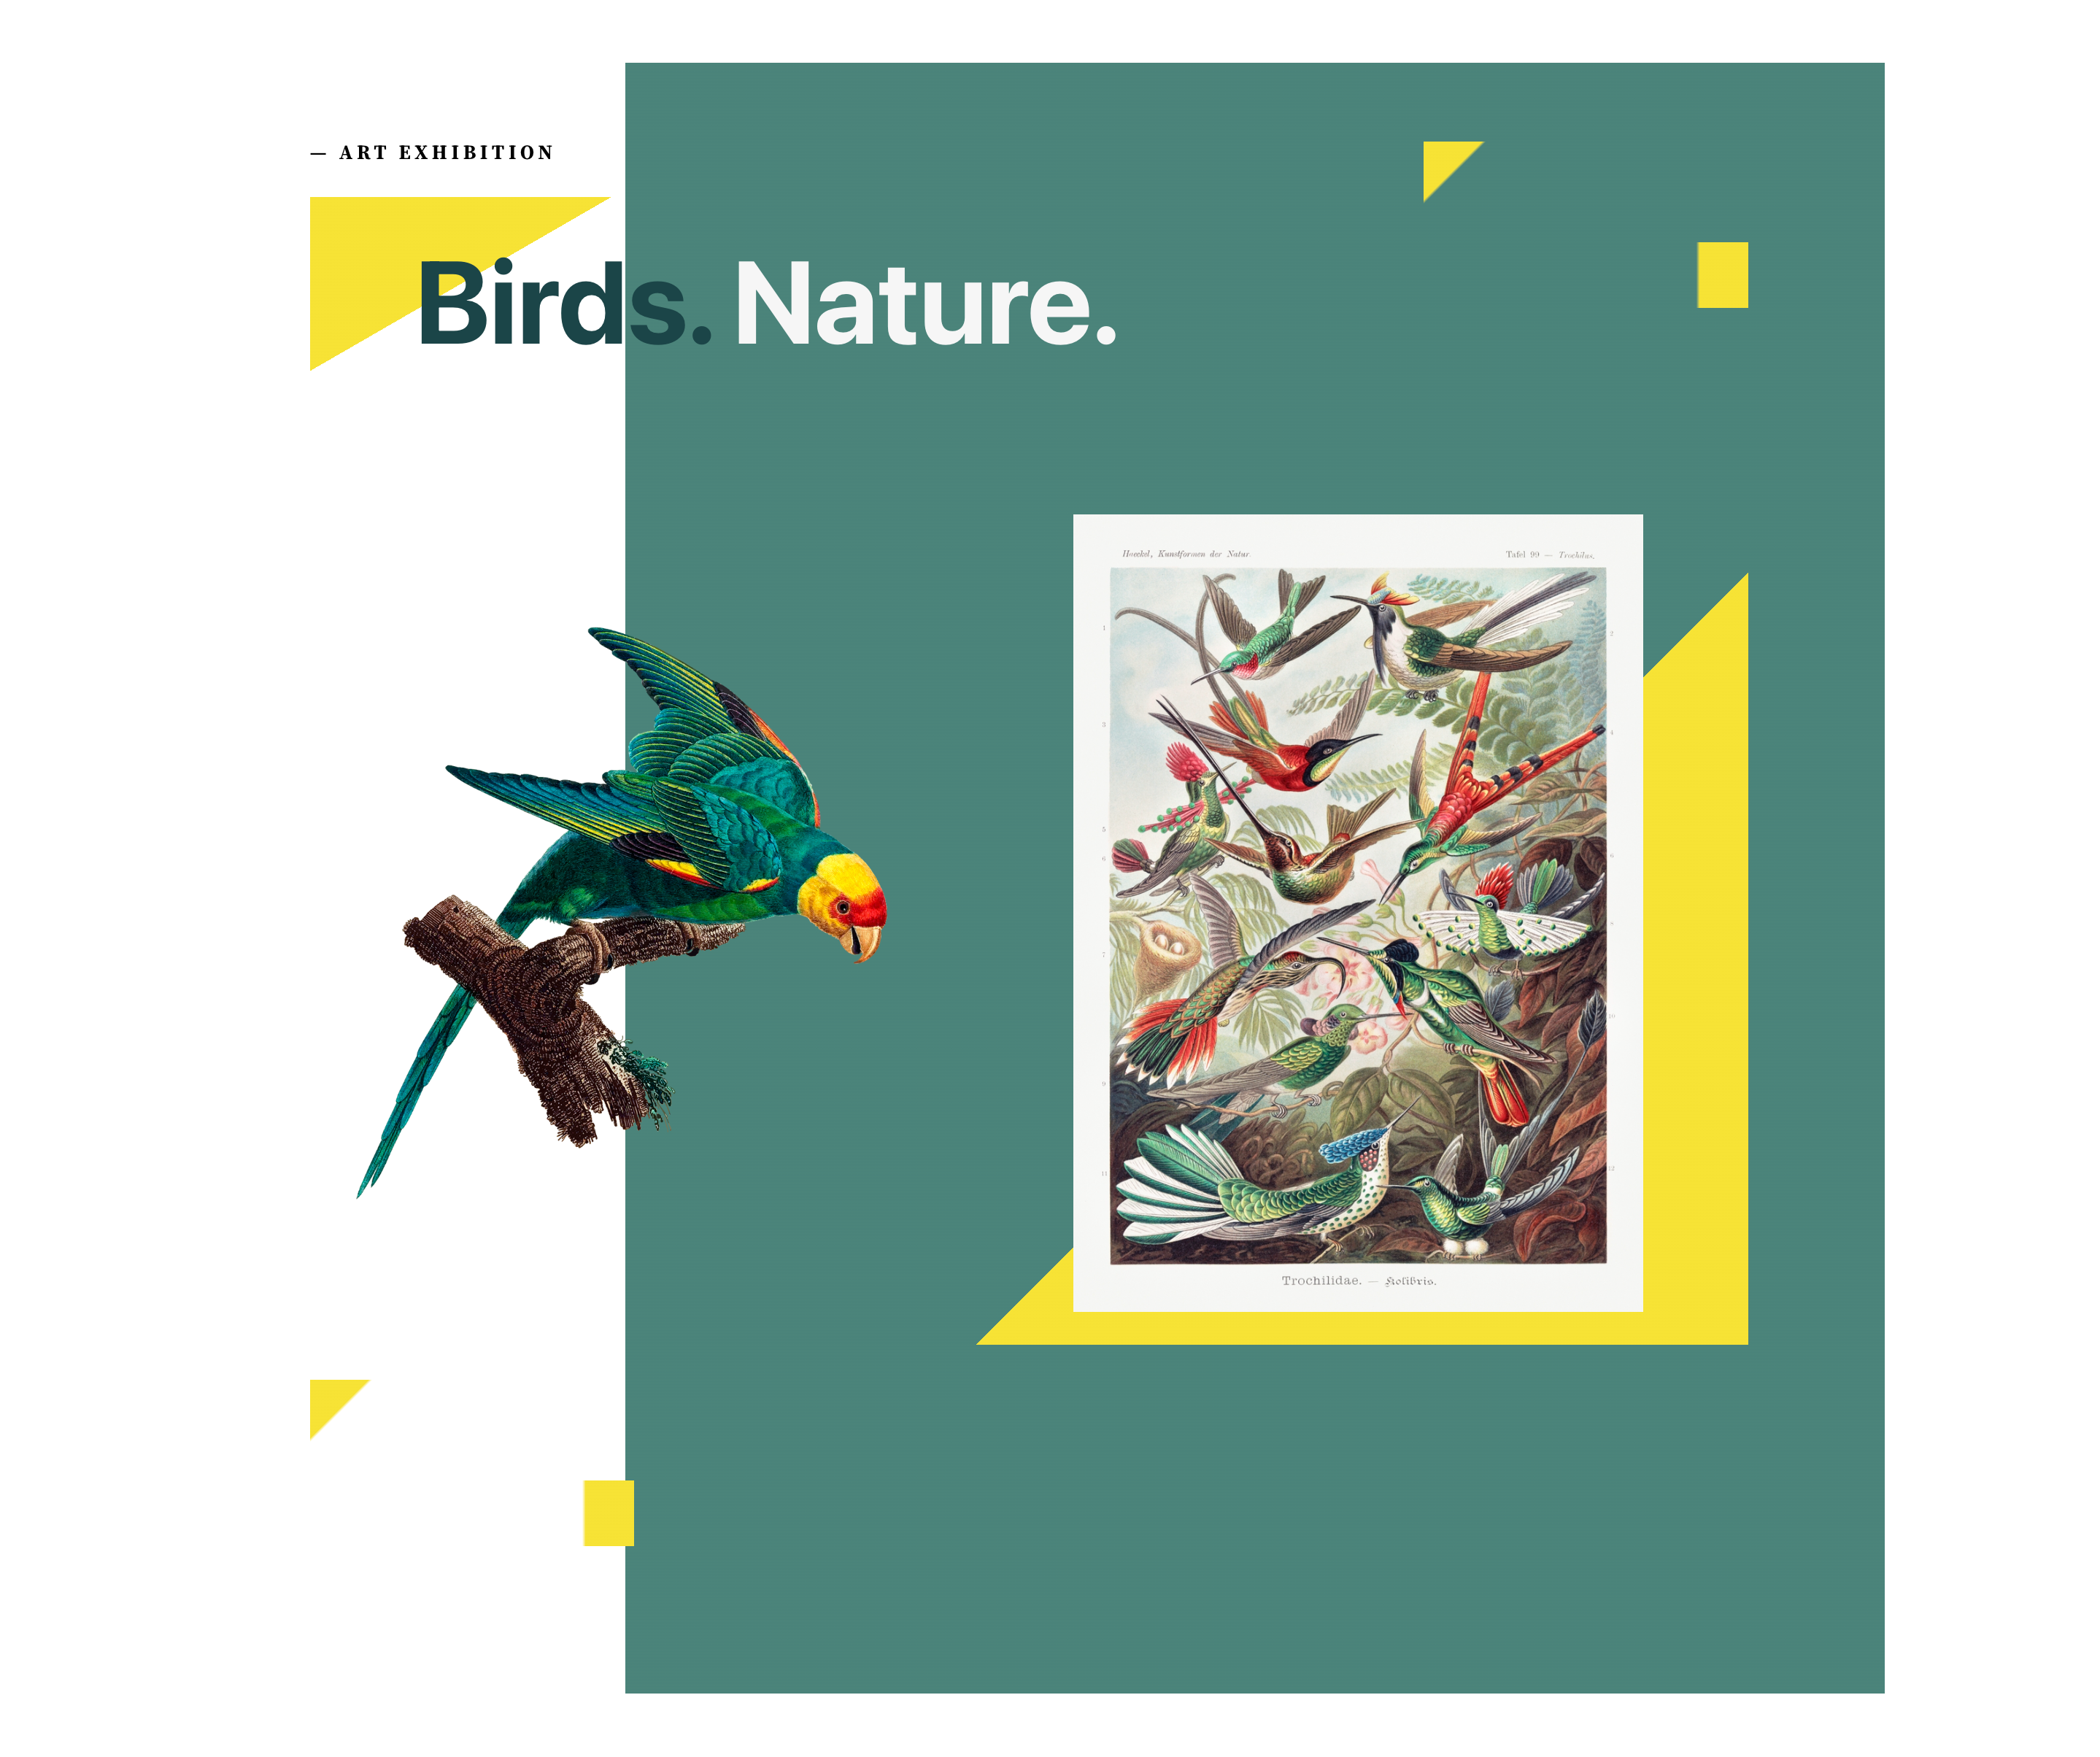 Images of birds placed on a half green, half white background with yellow accents coloring the image